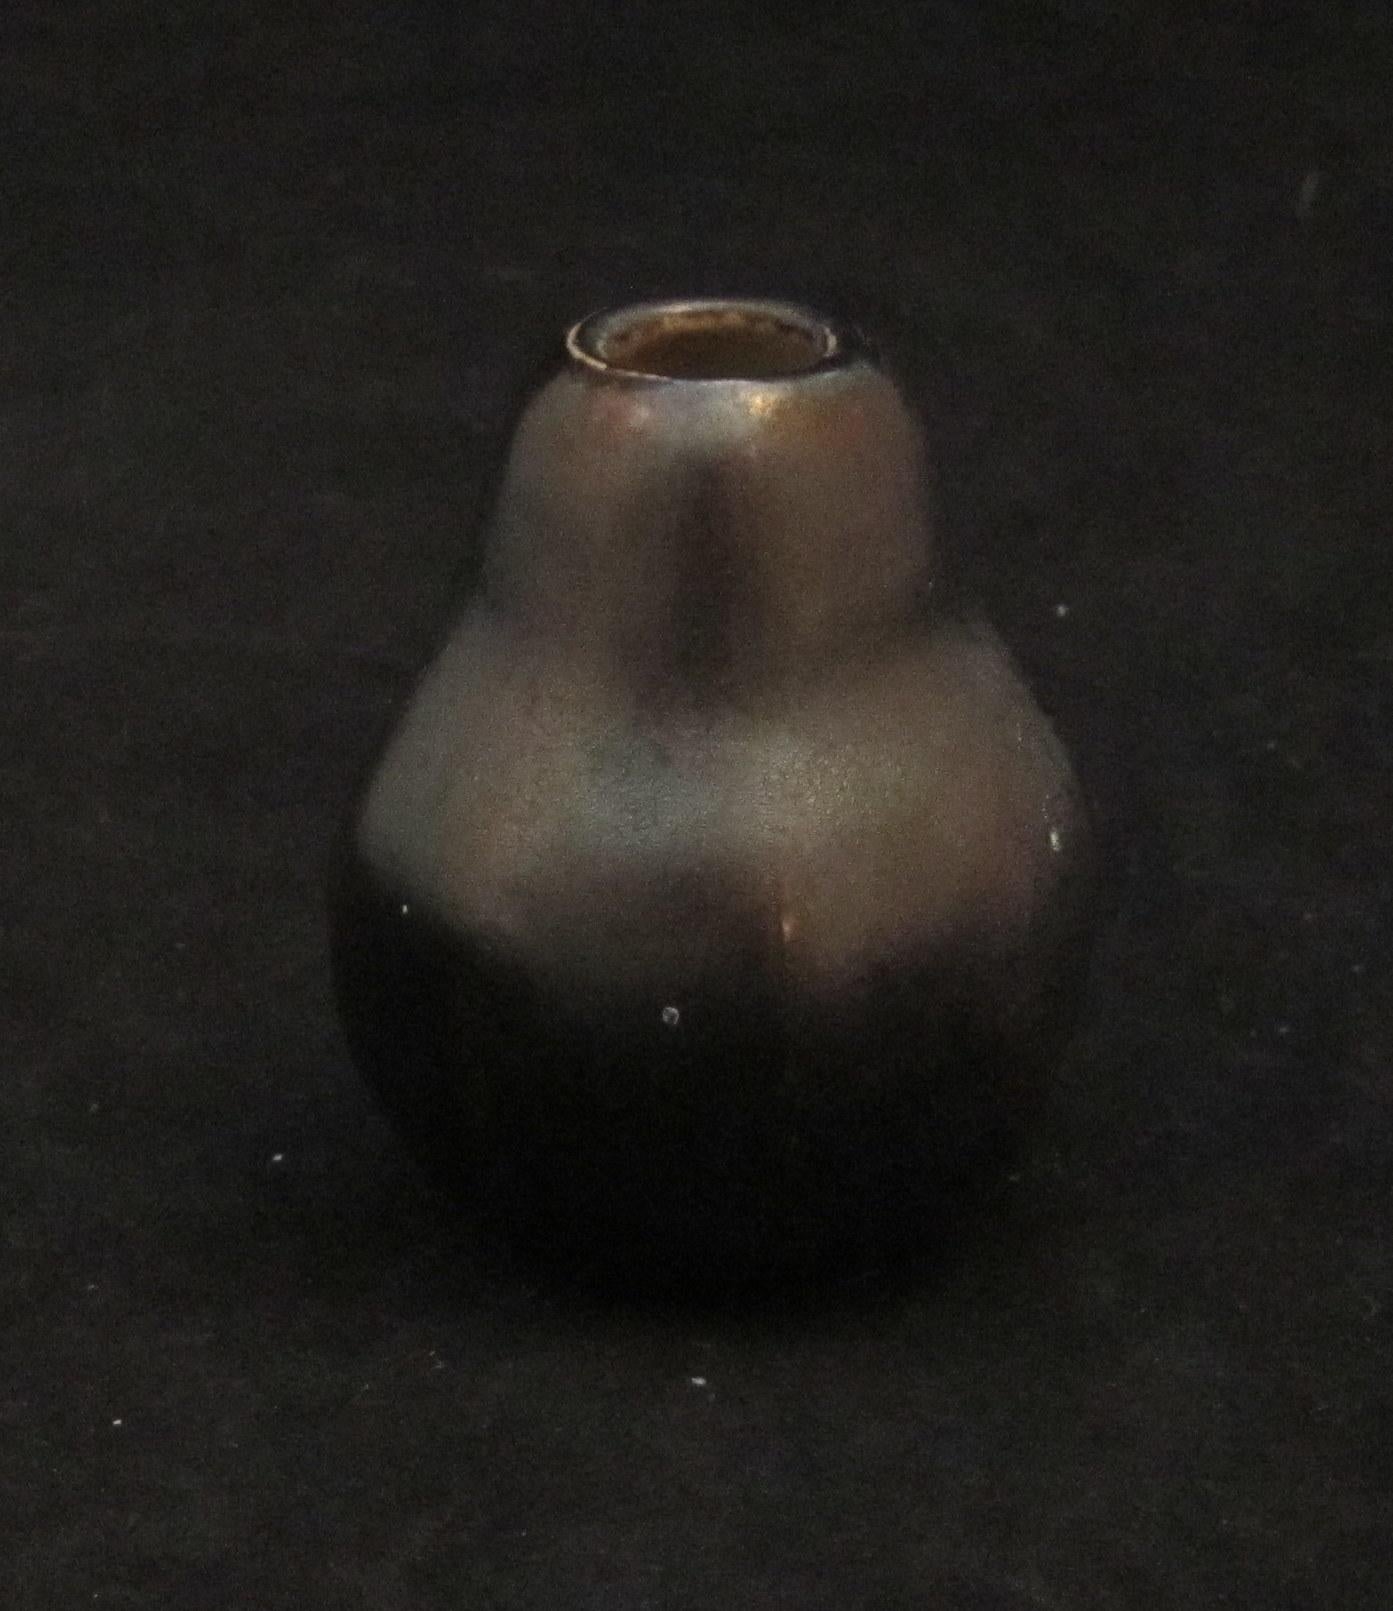 Edwin Martin for the Martin Brothers.
Martin Brothers miniature double gourd vase in a gunmetal coloured glaze. 

Dated 1904.